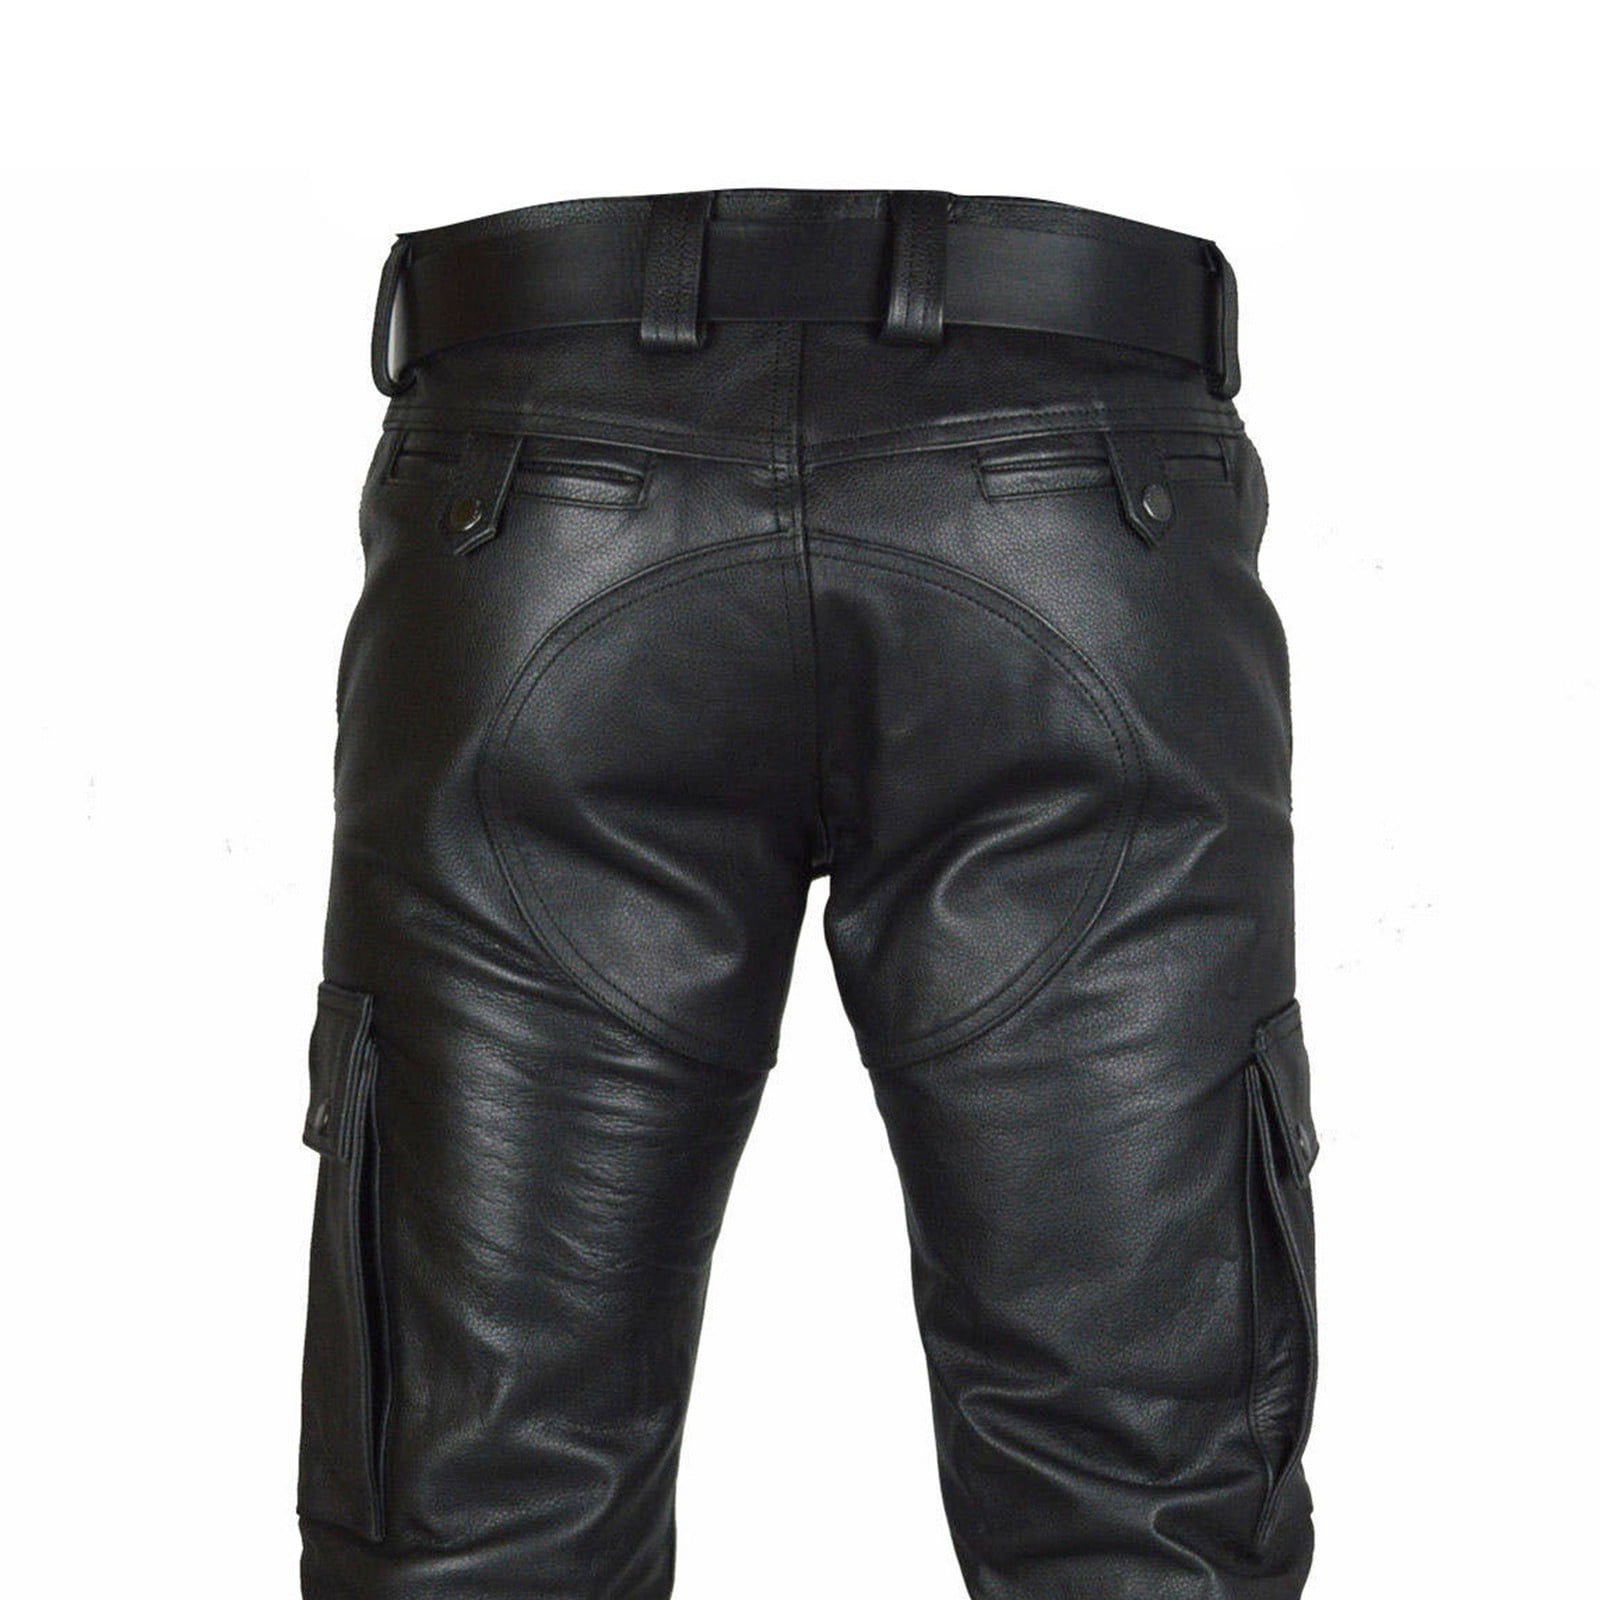 Mens Motorcycle Black Leather Pants Jeans Style Motorcycle Riding